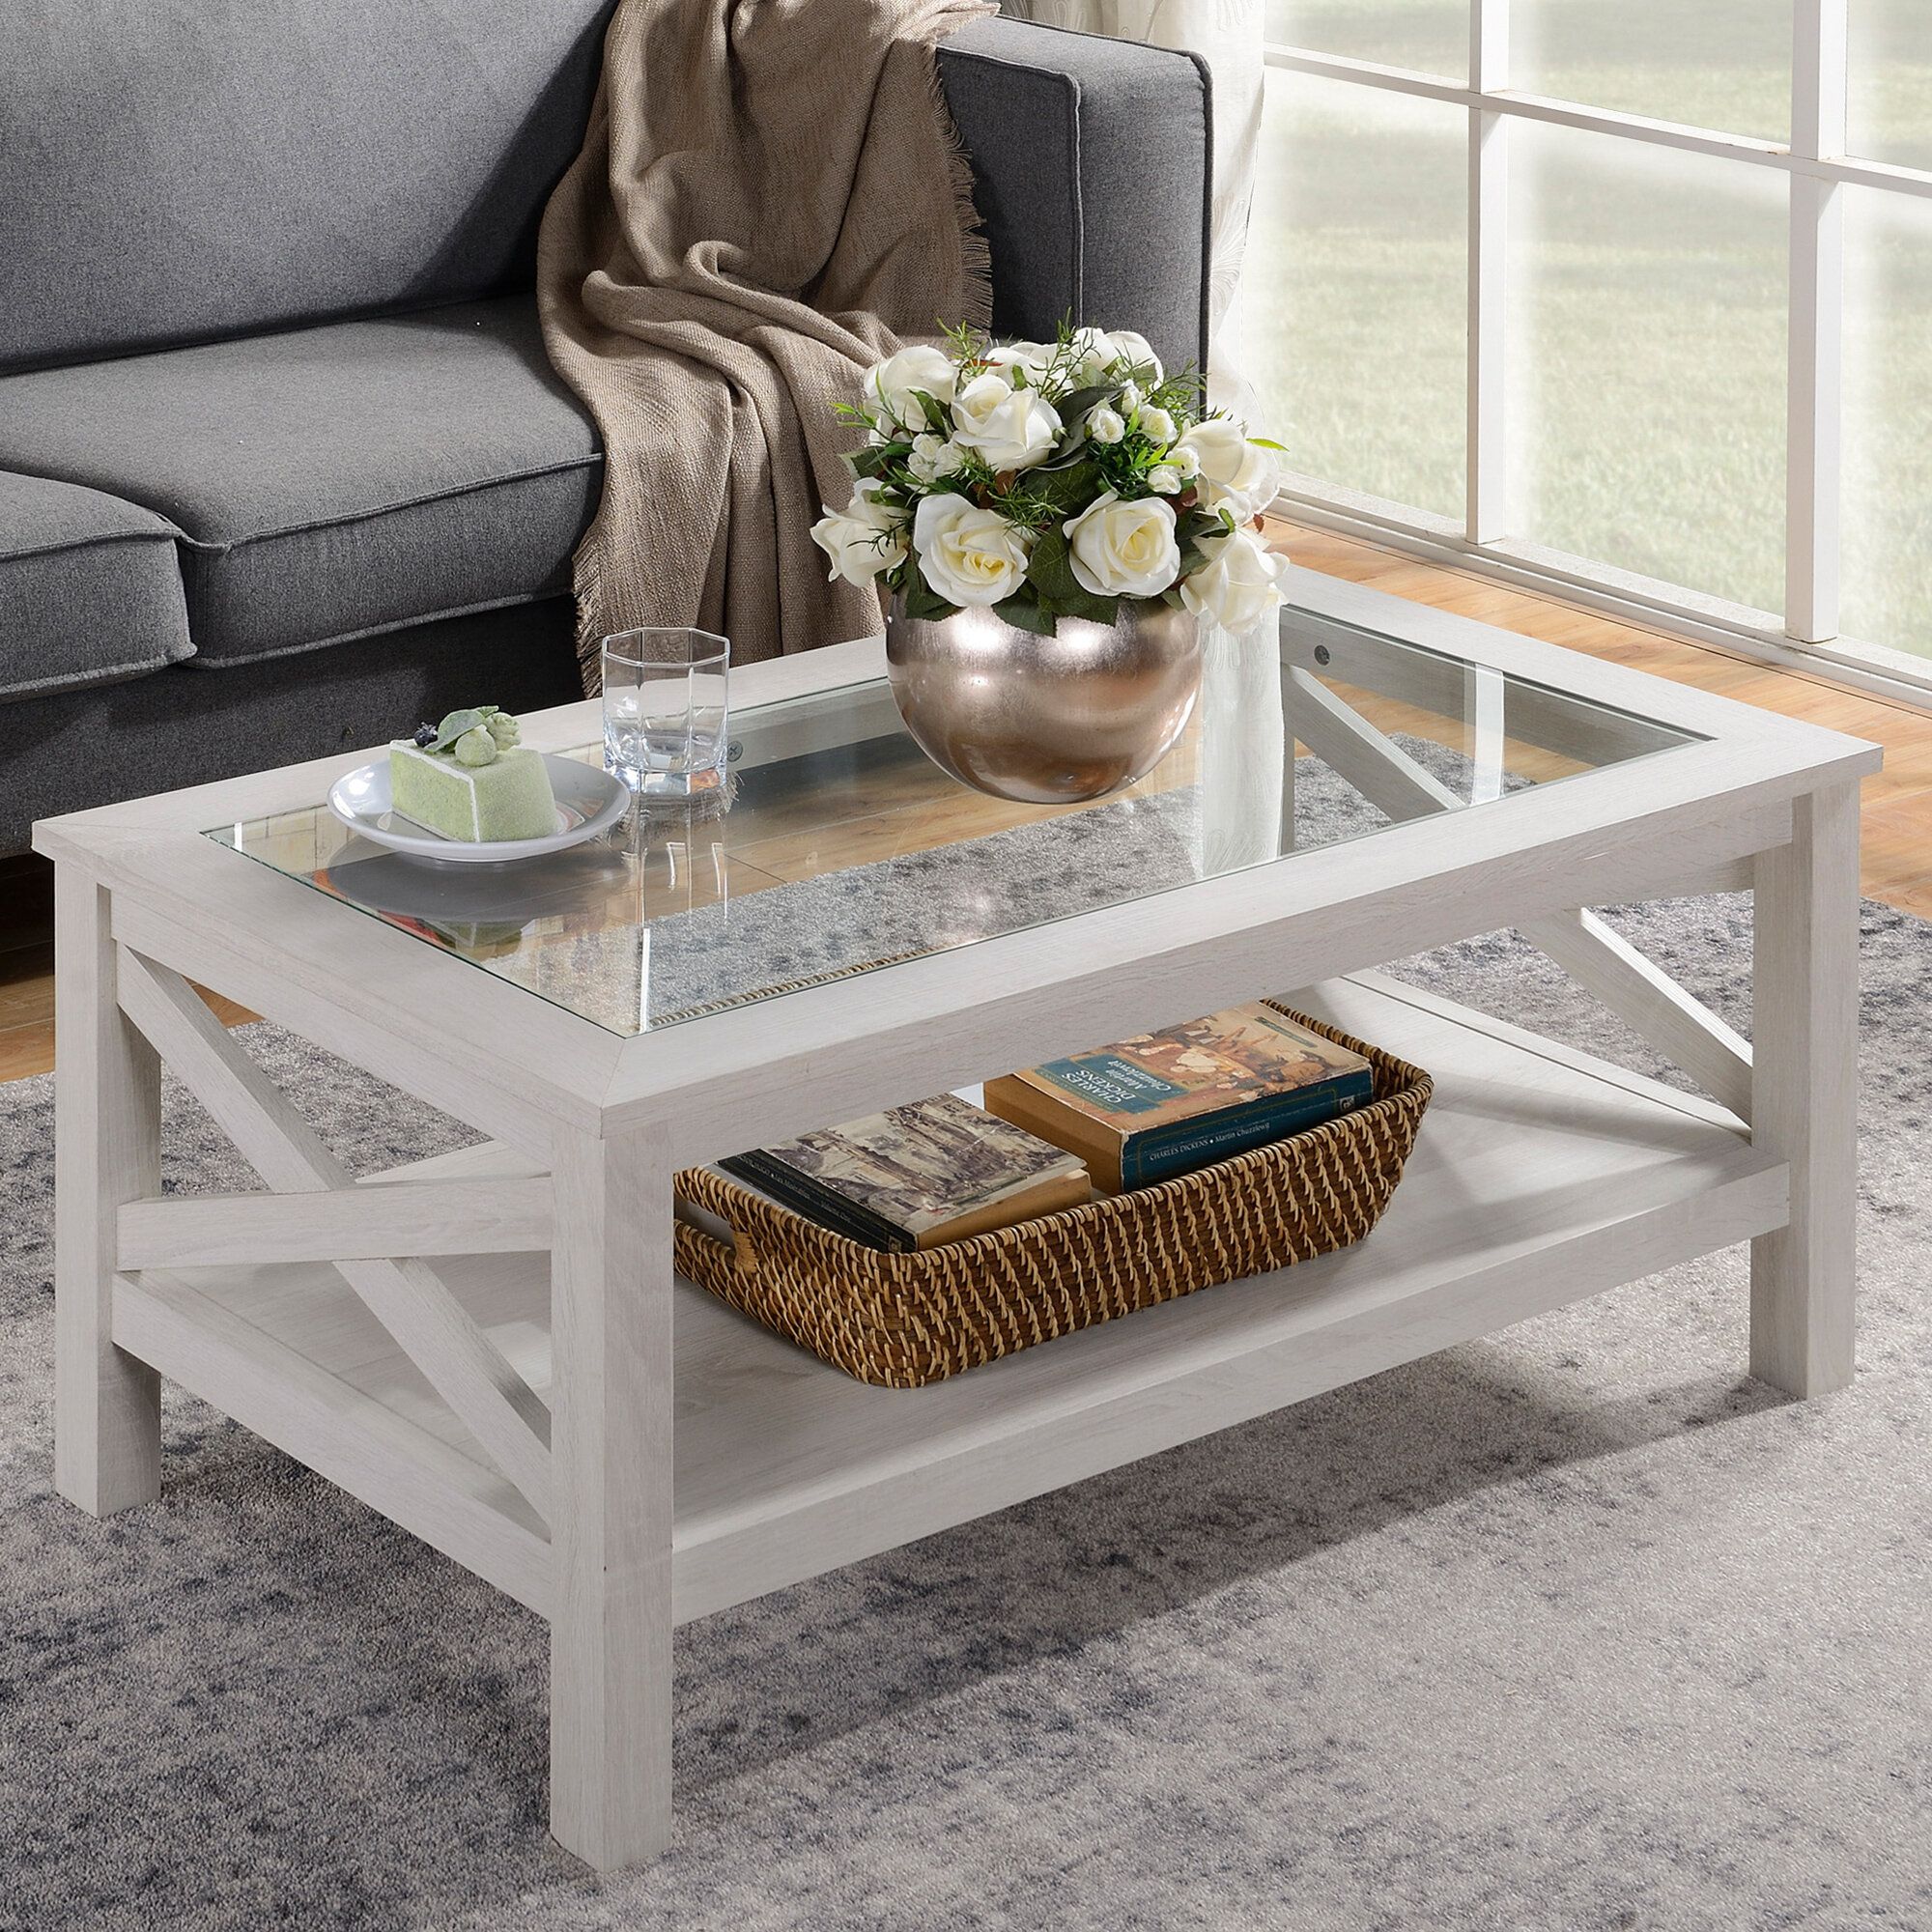 Gracie Oaks Espinet Traditional Coffee Table With Wood Frame, Tempered Glass  Tabletop And Underneath Storage Shelf, White Oak & Reviews | Wayfair Inside Smooth Top Coffee Tables (View 11 of 20)